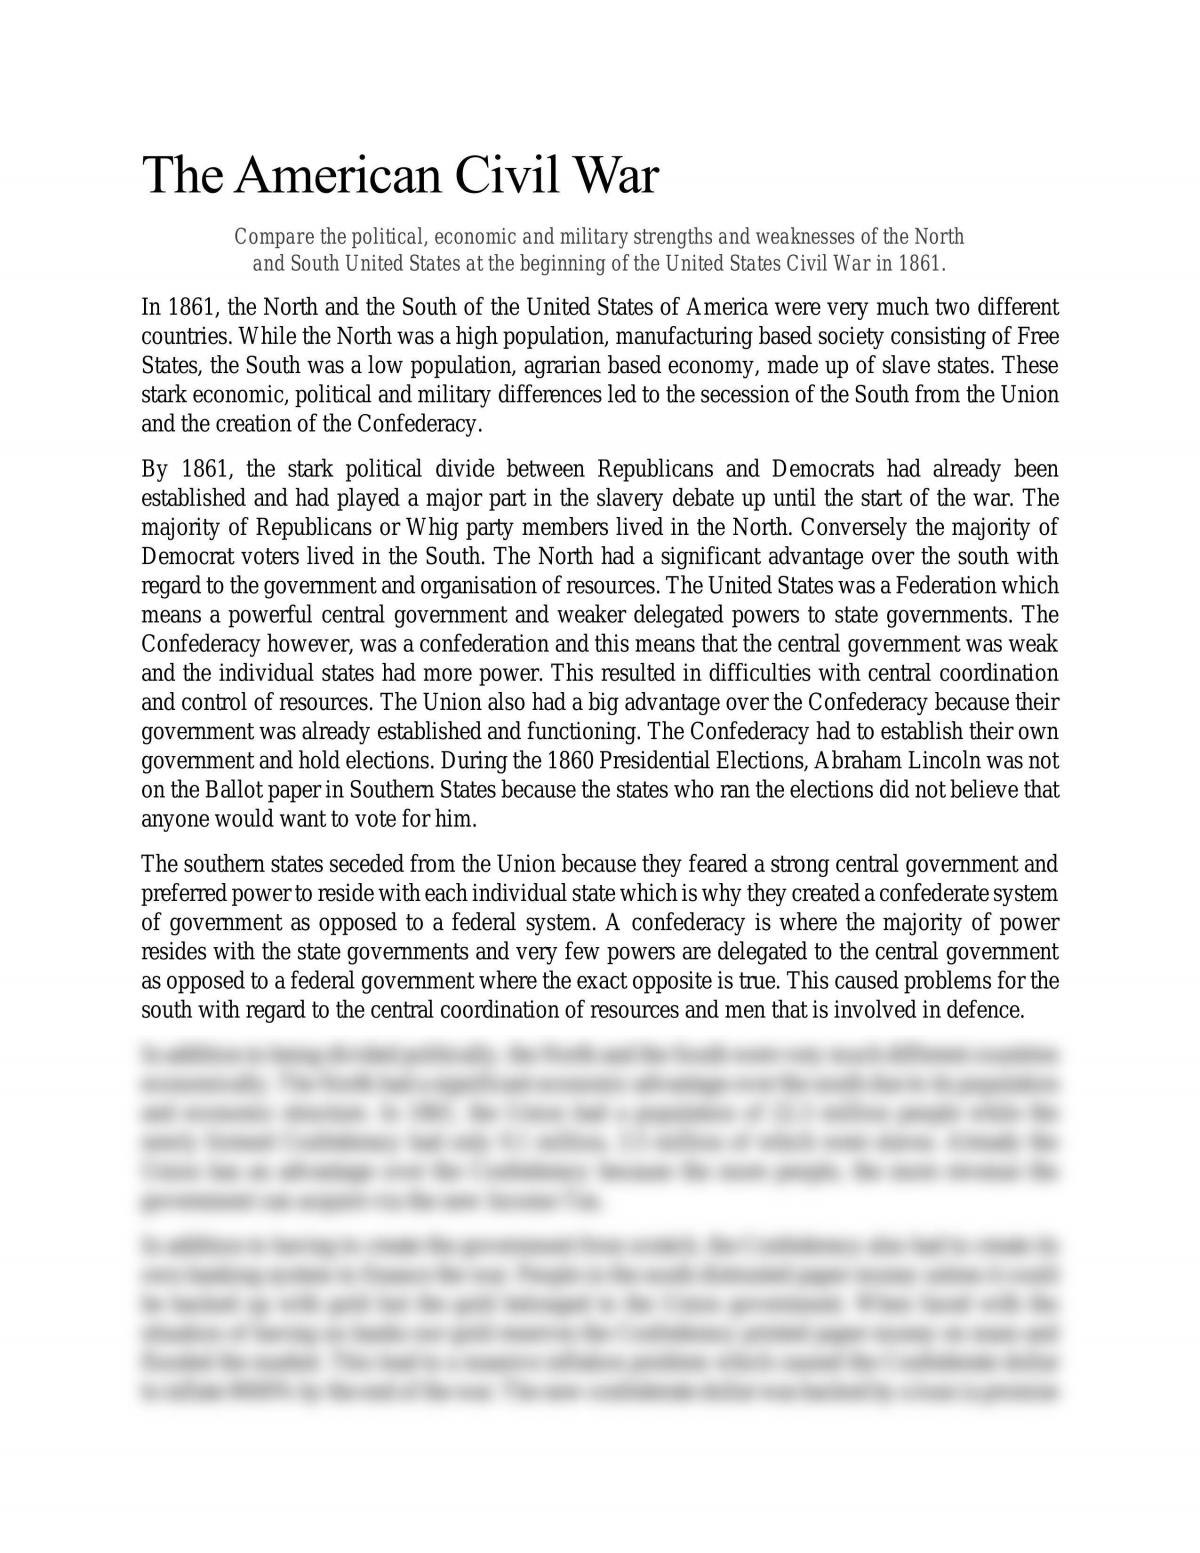 war of the wall essay